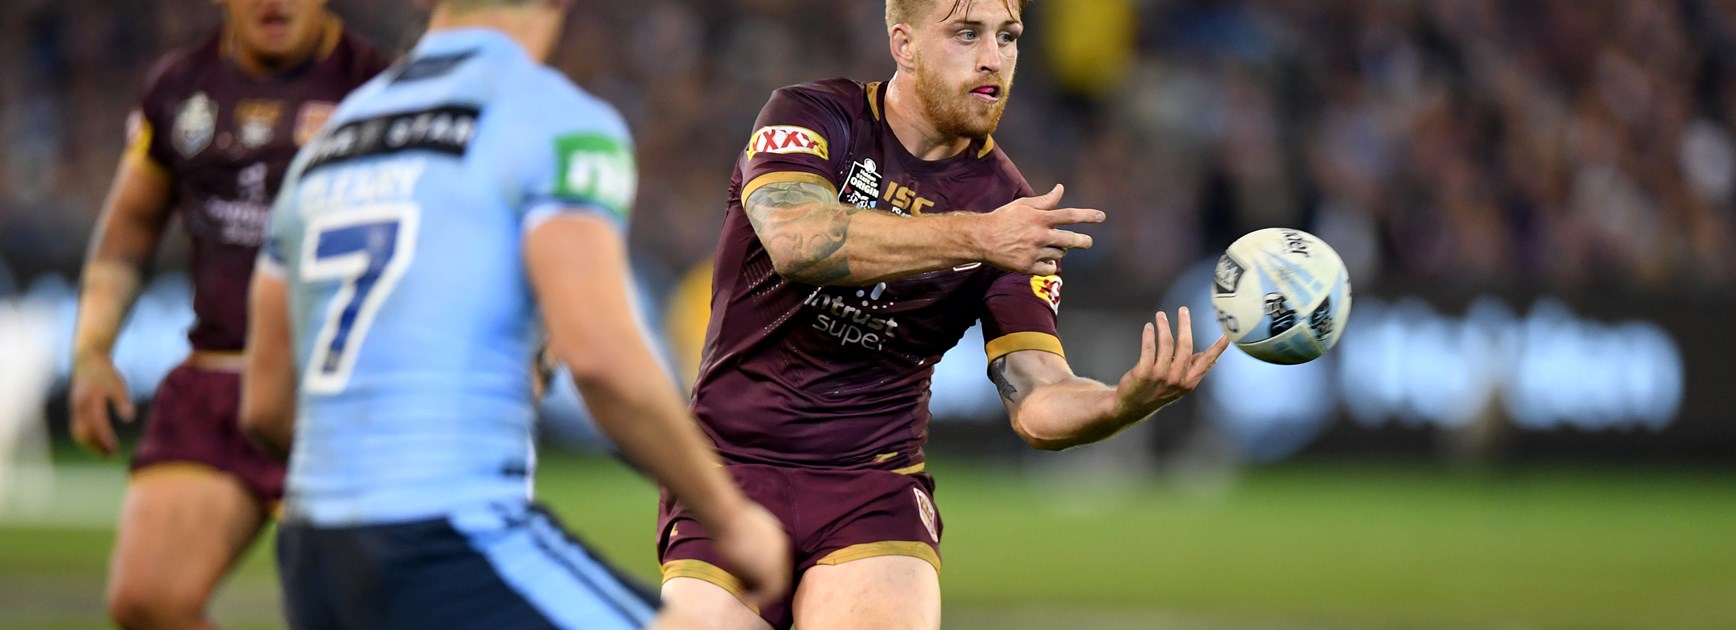 Most improved player of 2018: NRL.com experts have their say